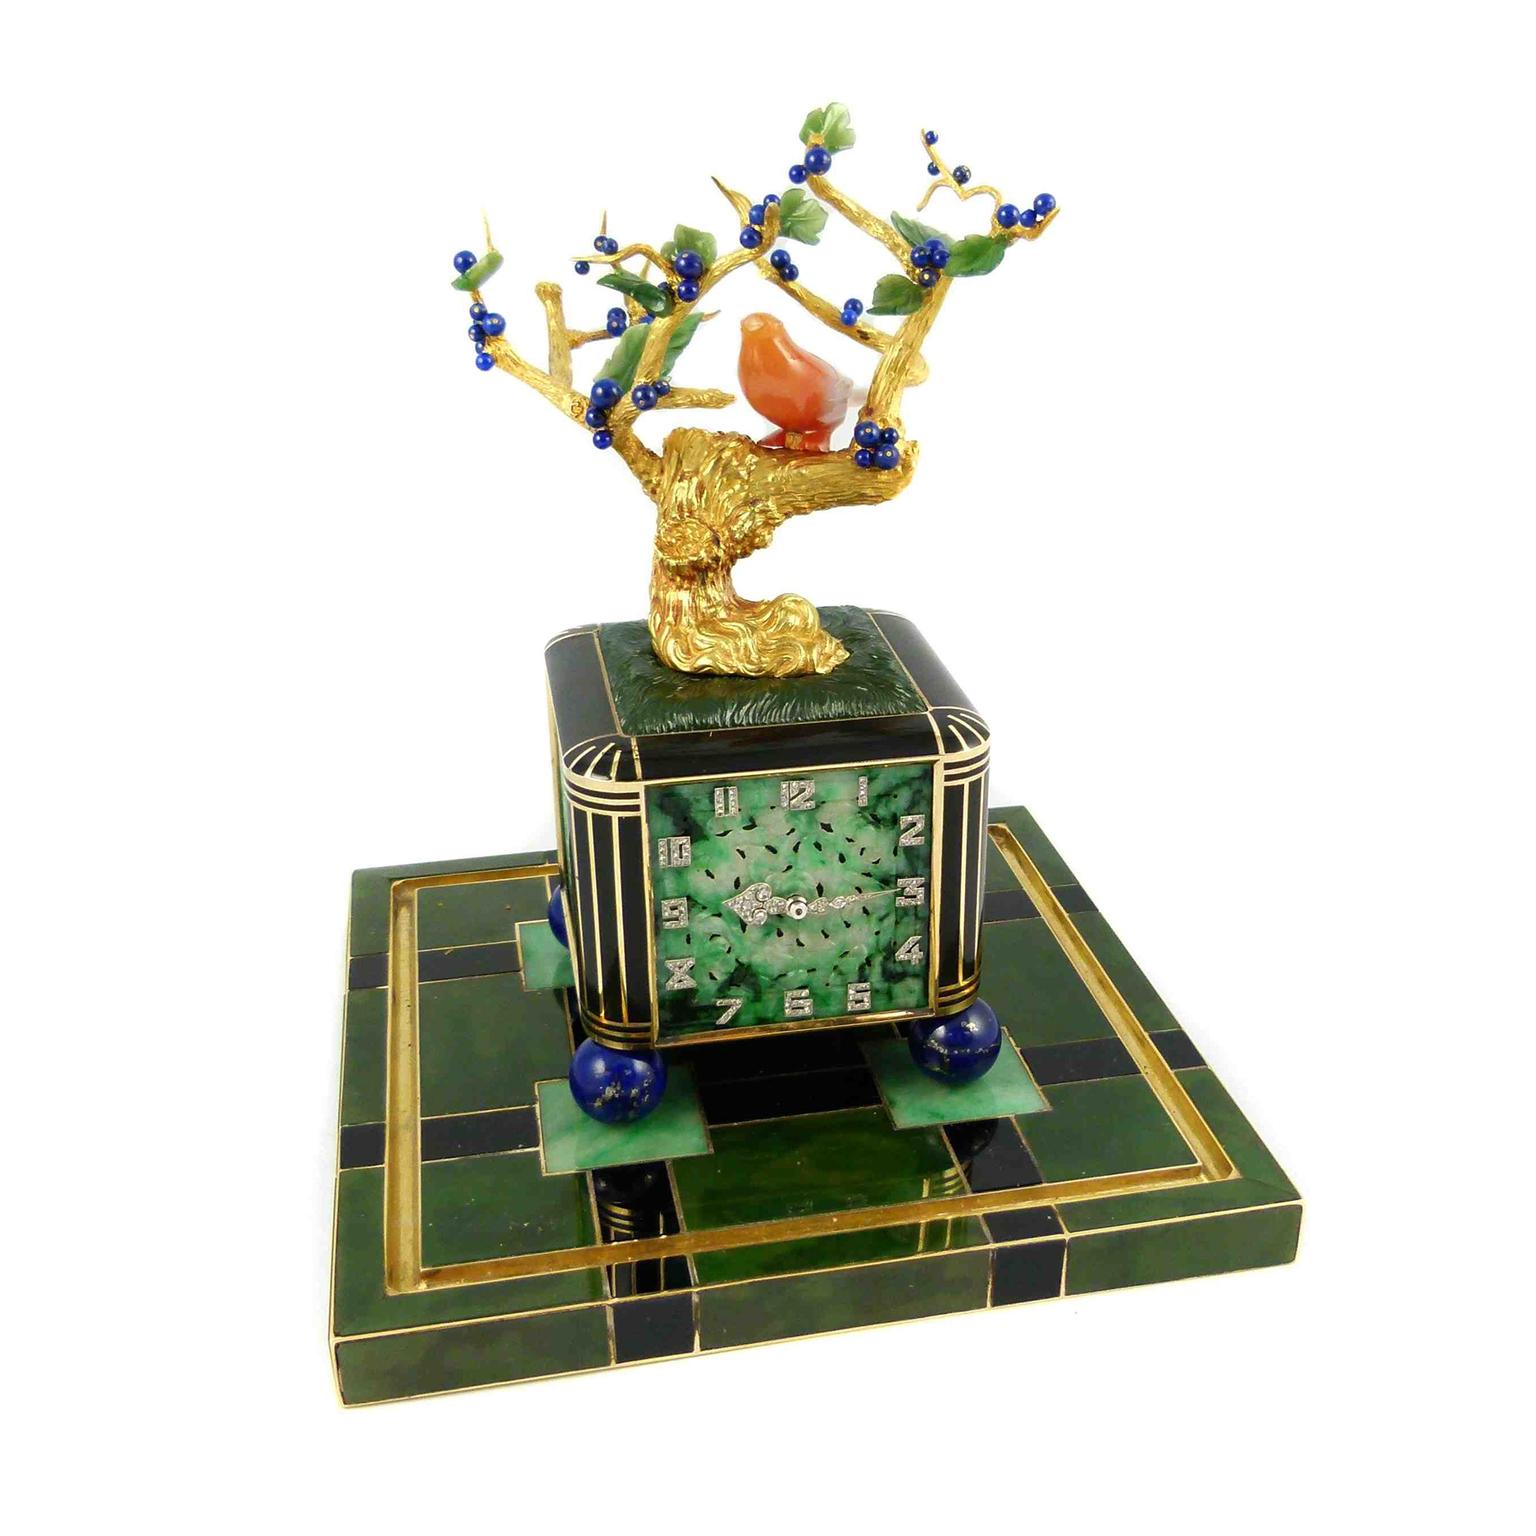 SJ Phillips' Bonsai tree and vase clock by Verger Frères